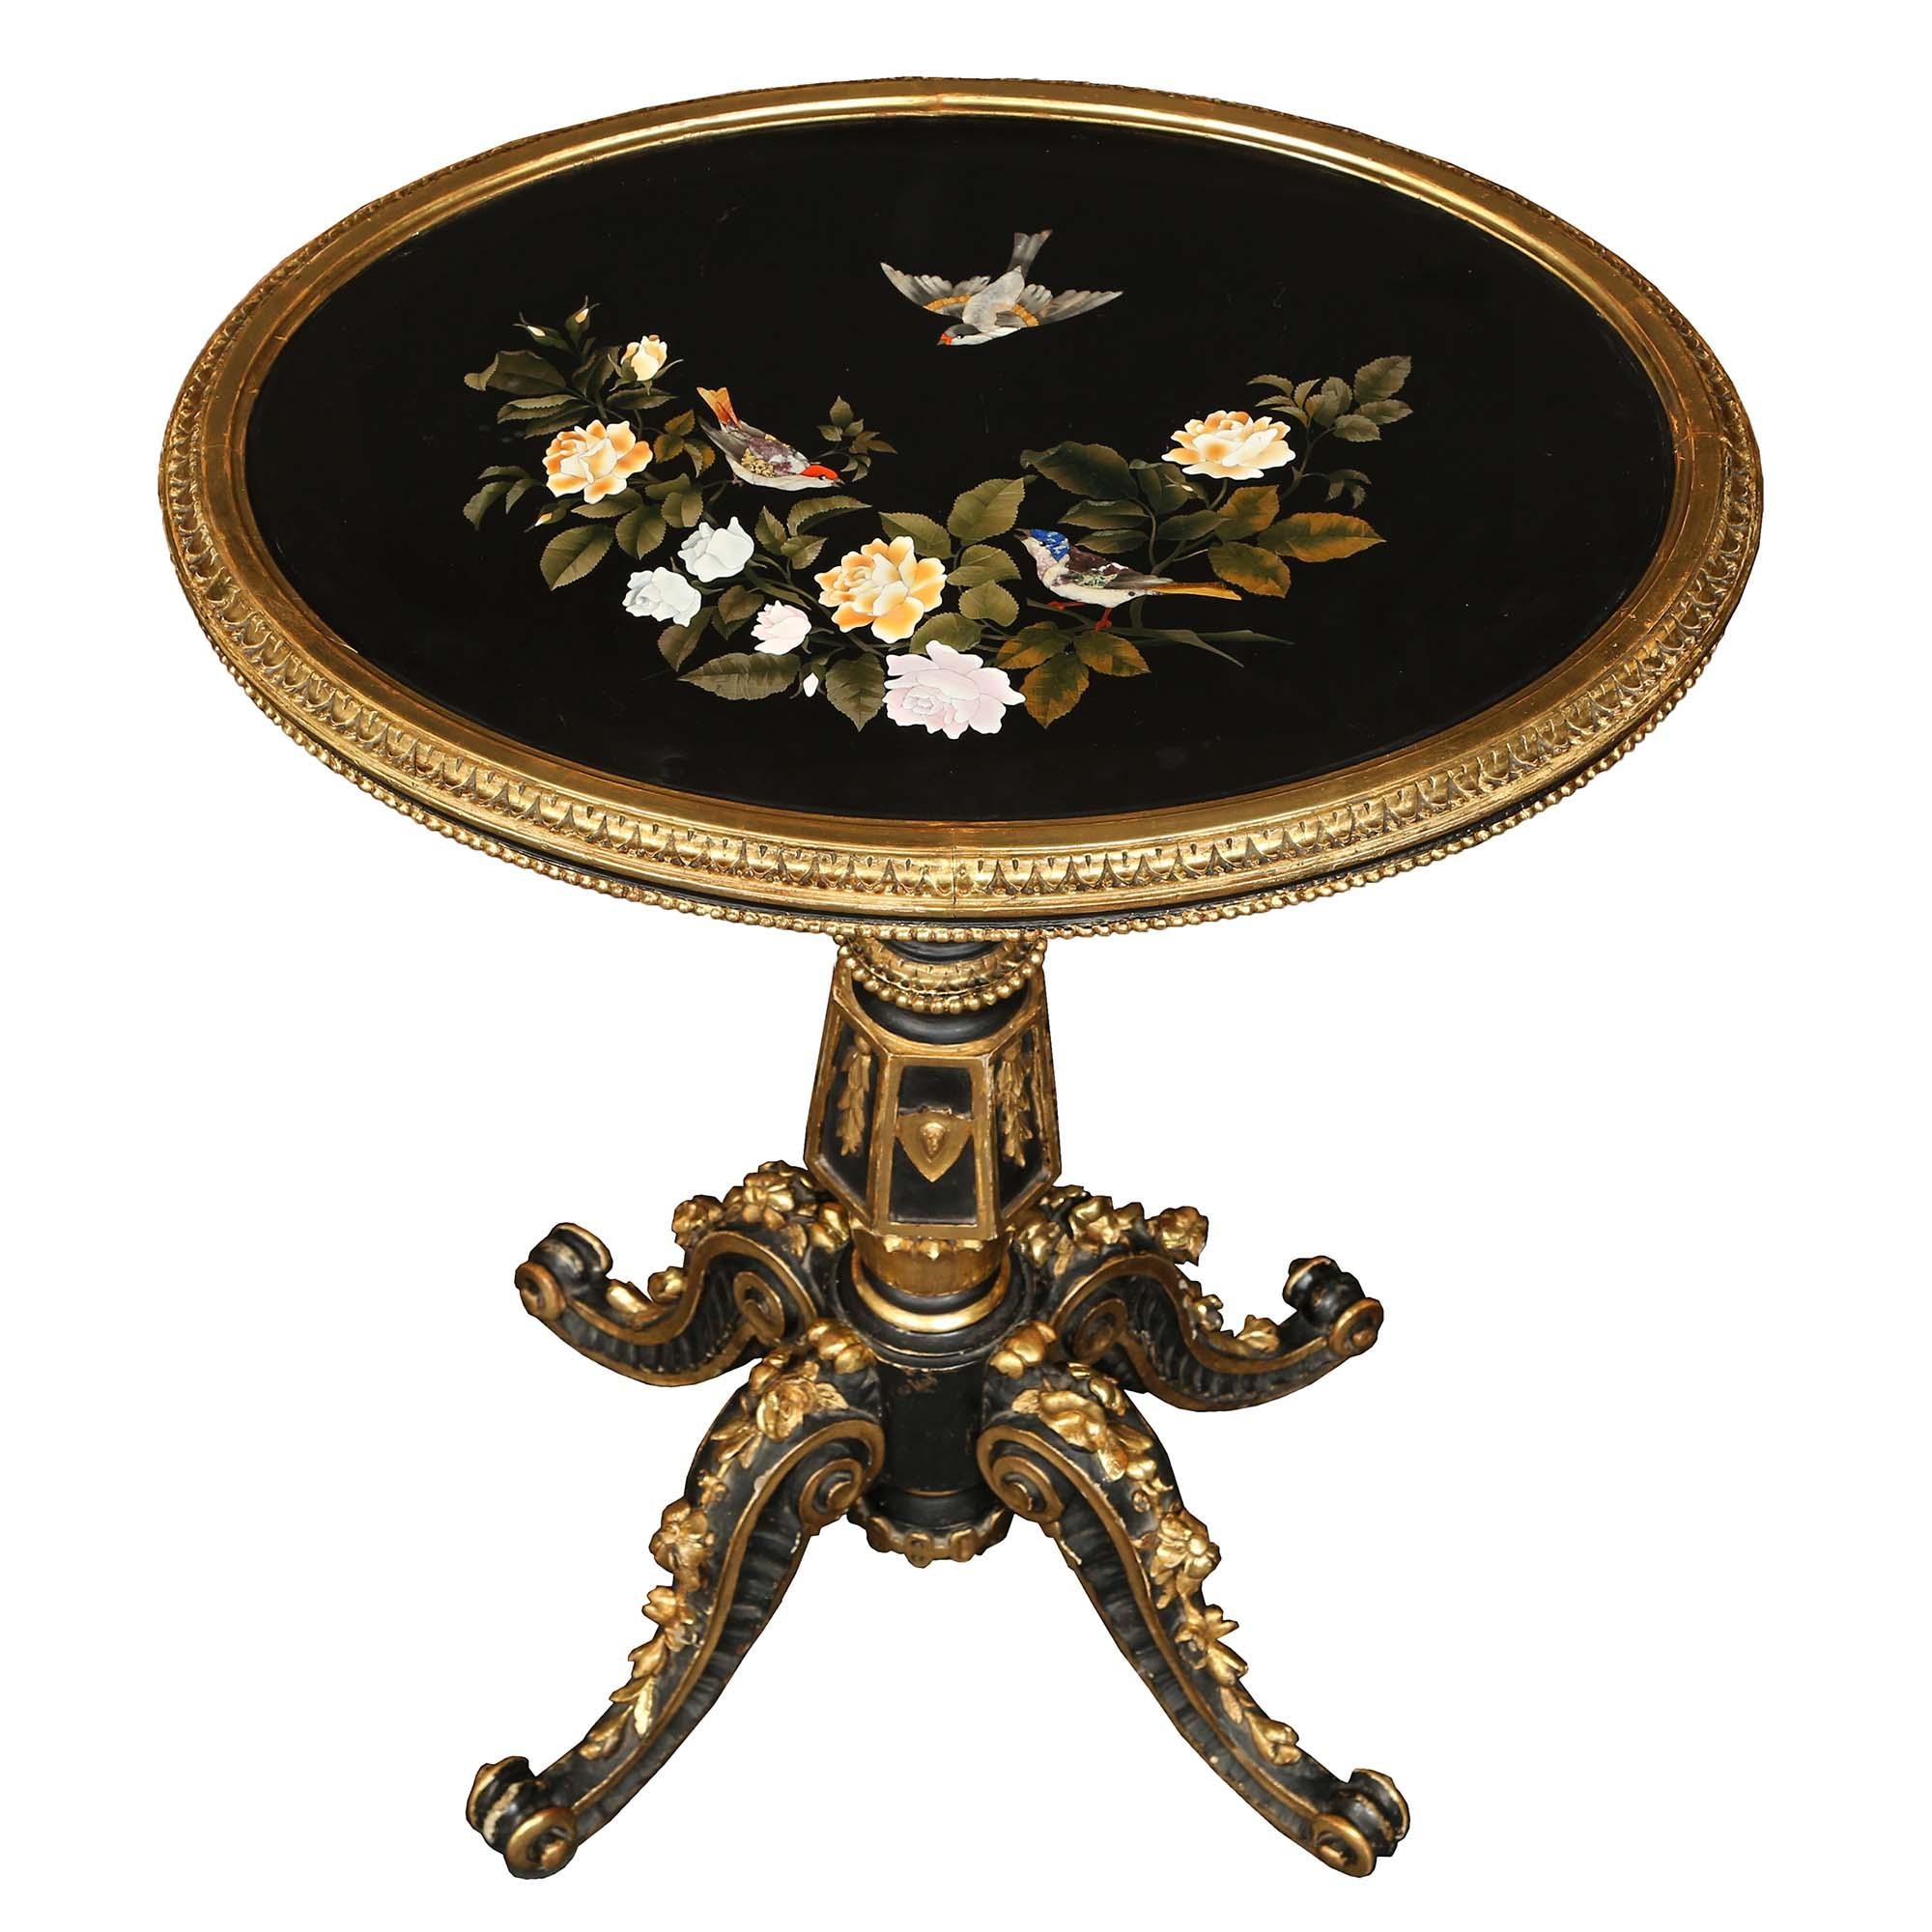 A striking Italian 19th century Napoleon III Period patinated black, giltwood and Pietra Dura marble Florentine oval side table. The table is raised by four elegant S scrolled black patinated legs decorated with wonderful reeded patterns, giltwood